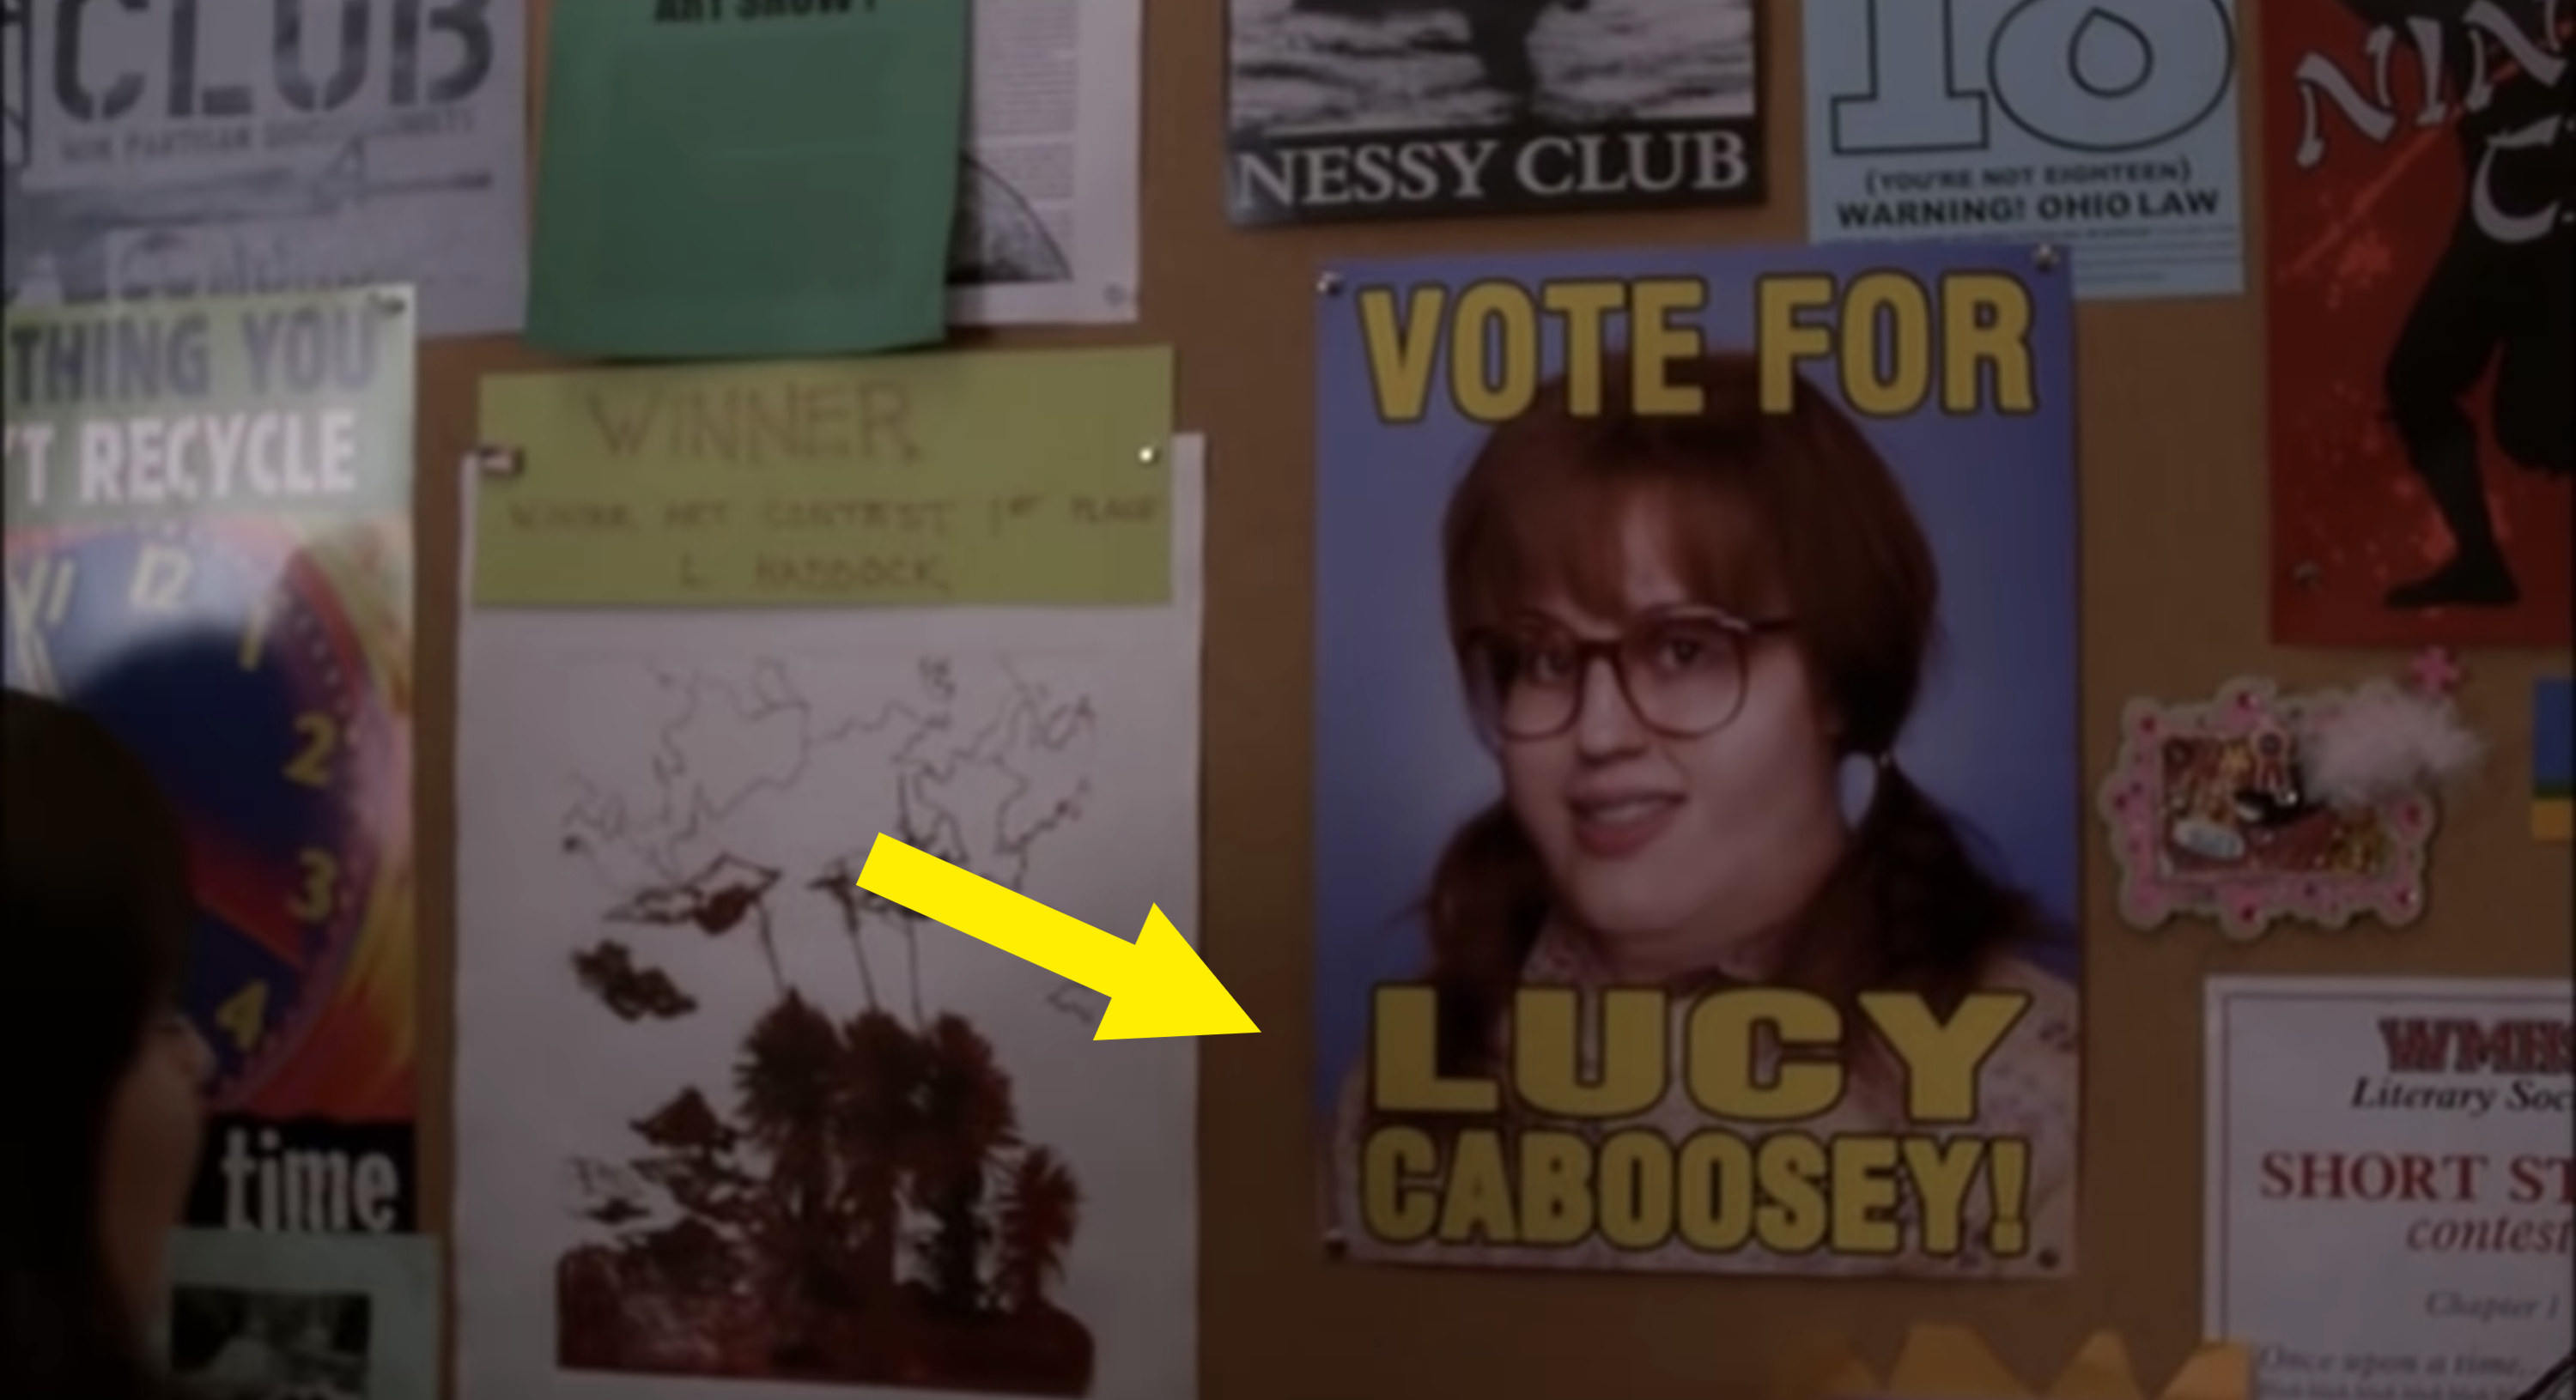 Lucy Caboosey poster posted at school